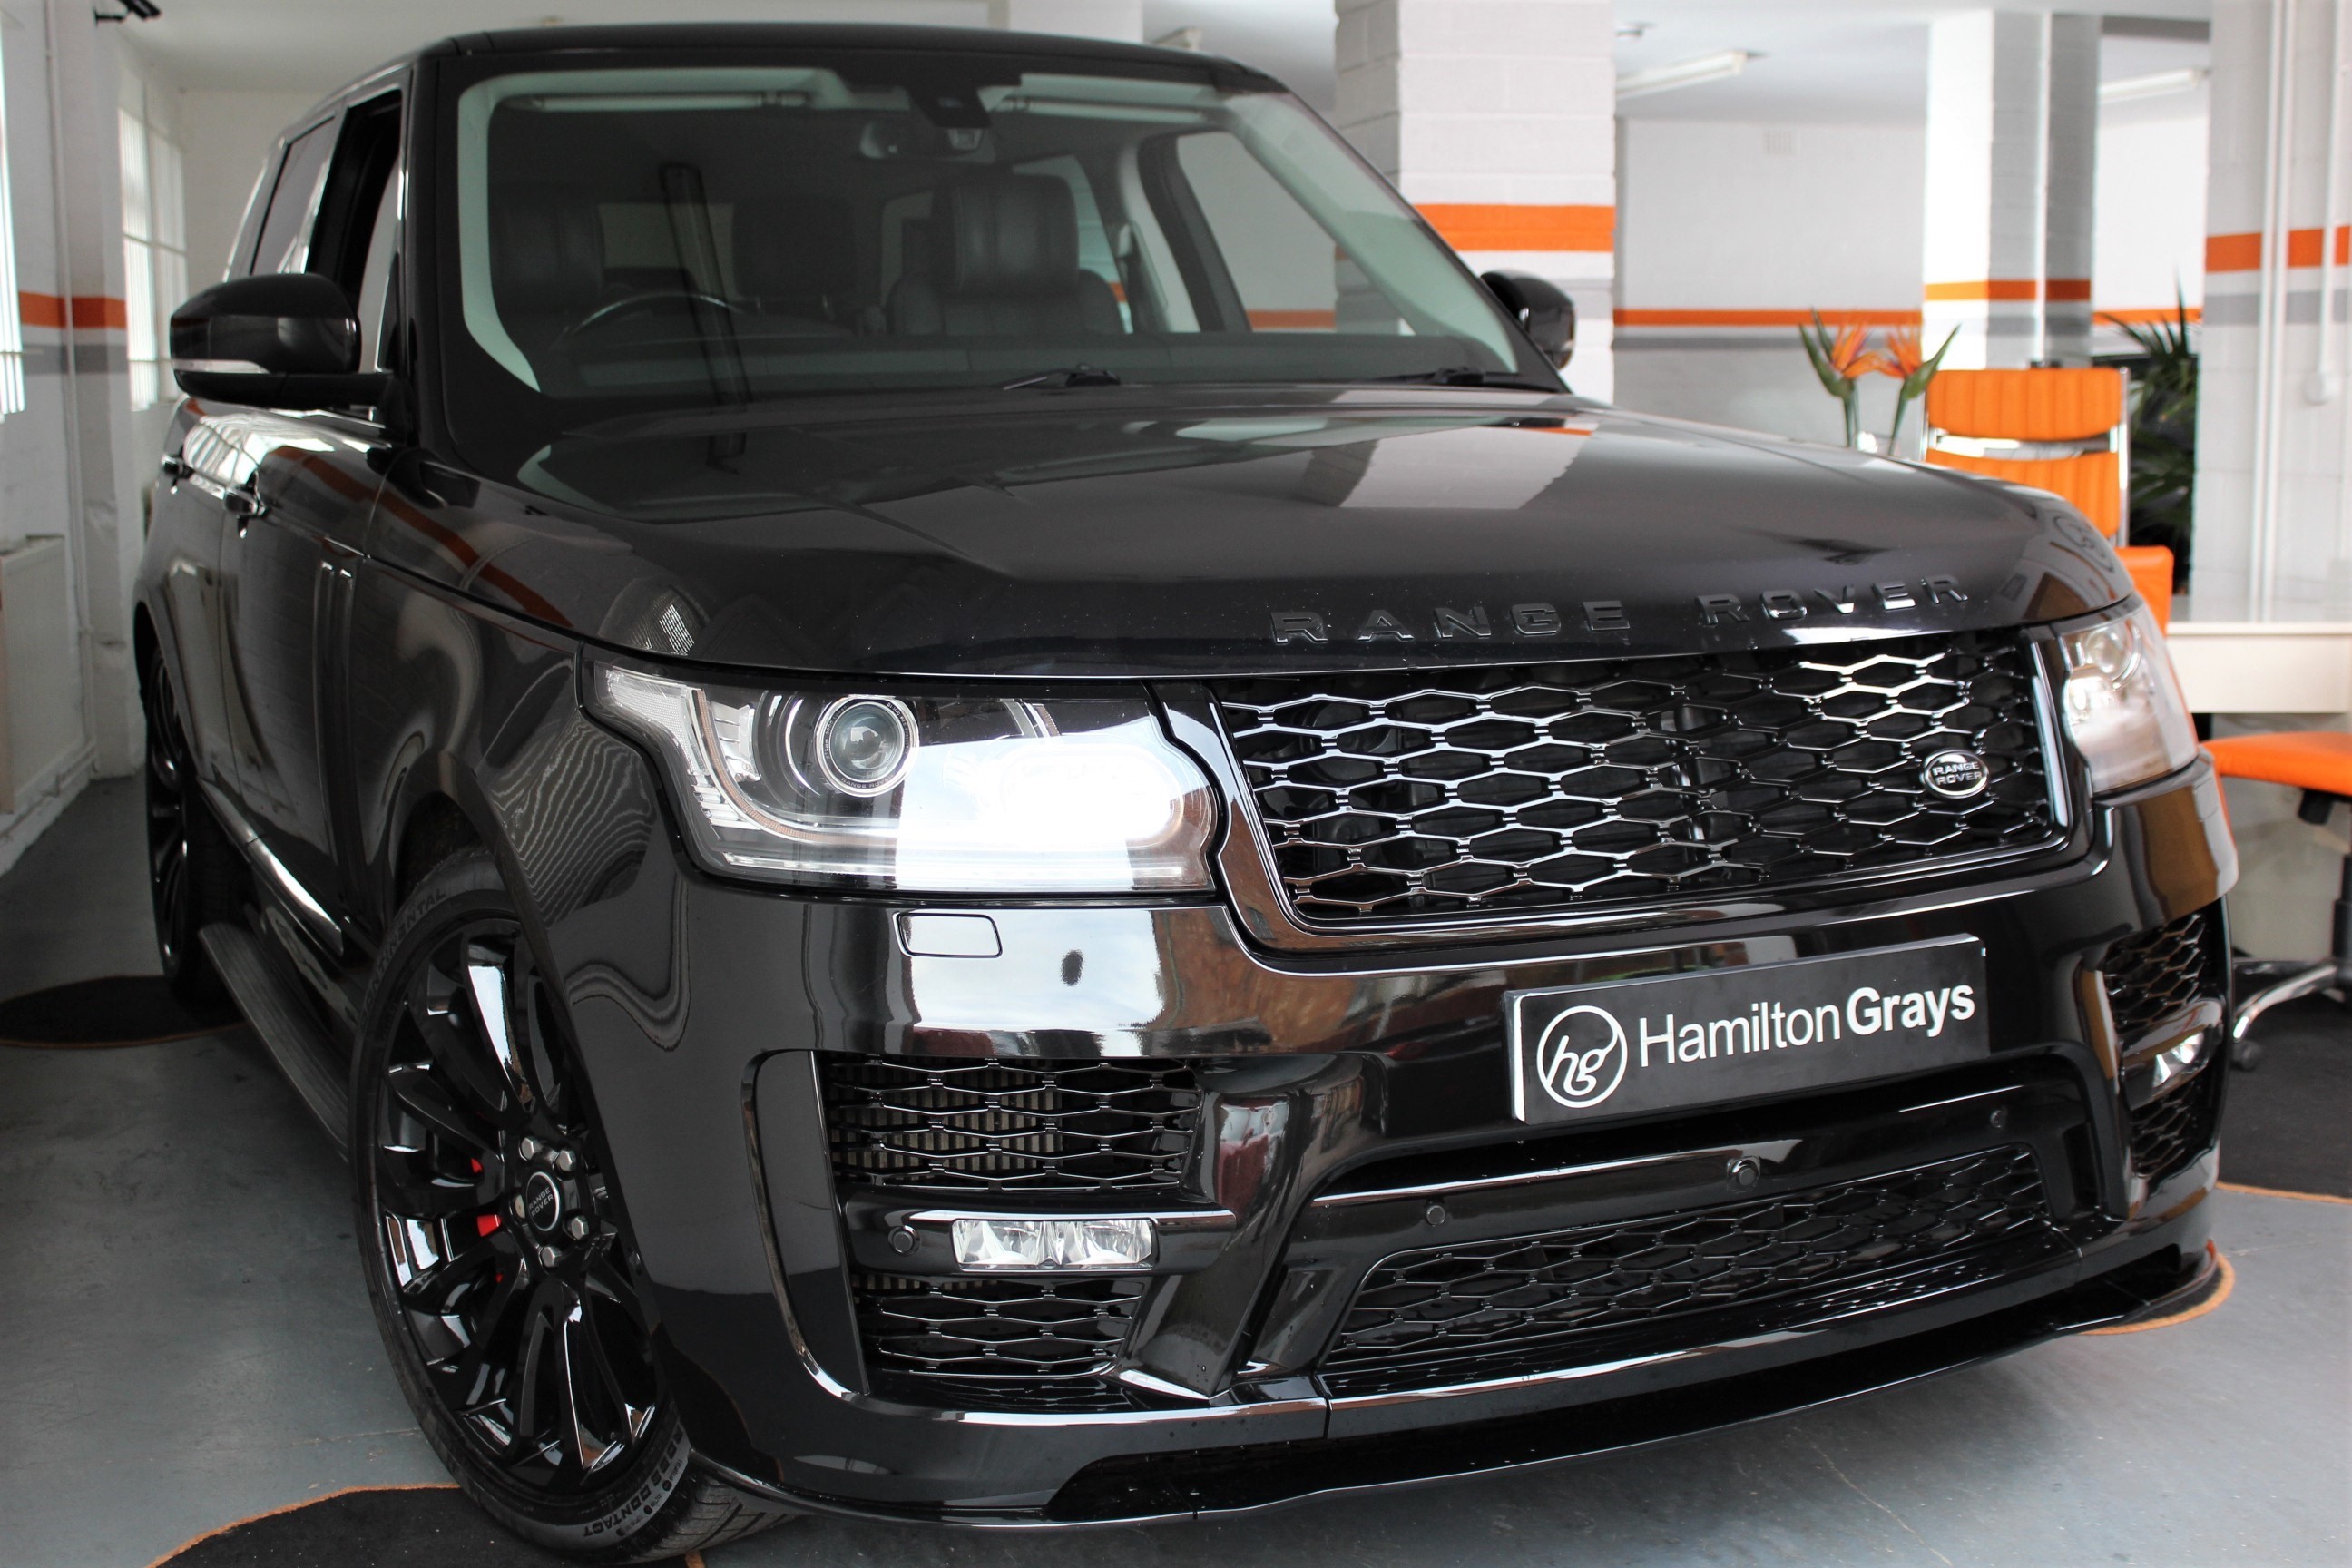 2015 (15) Range Rover 4.4 SDV8 Autobiography SVO Specification FLRSH, Pan Roof,  (SOLD)